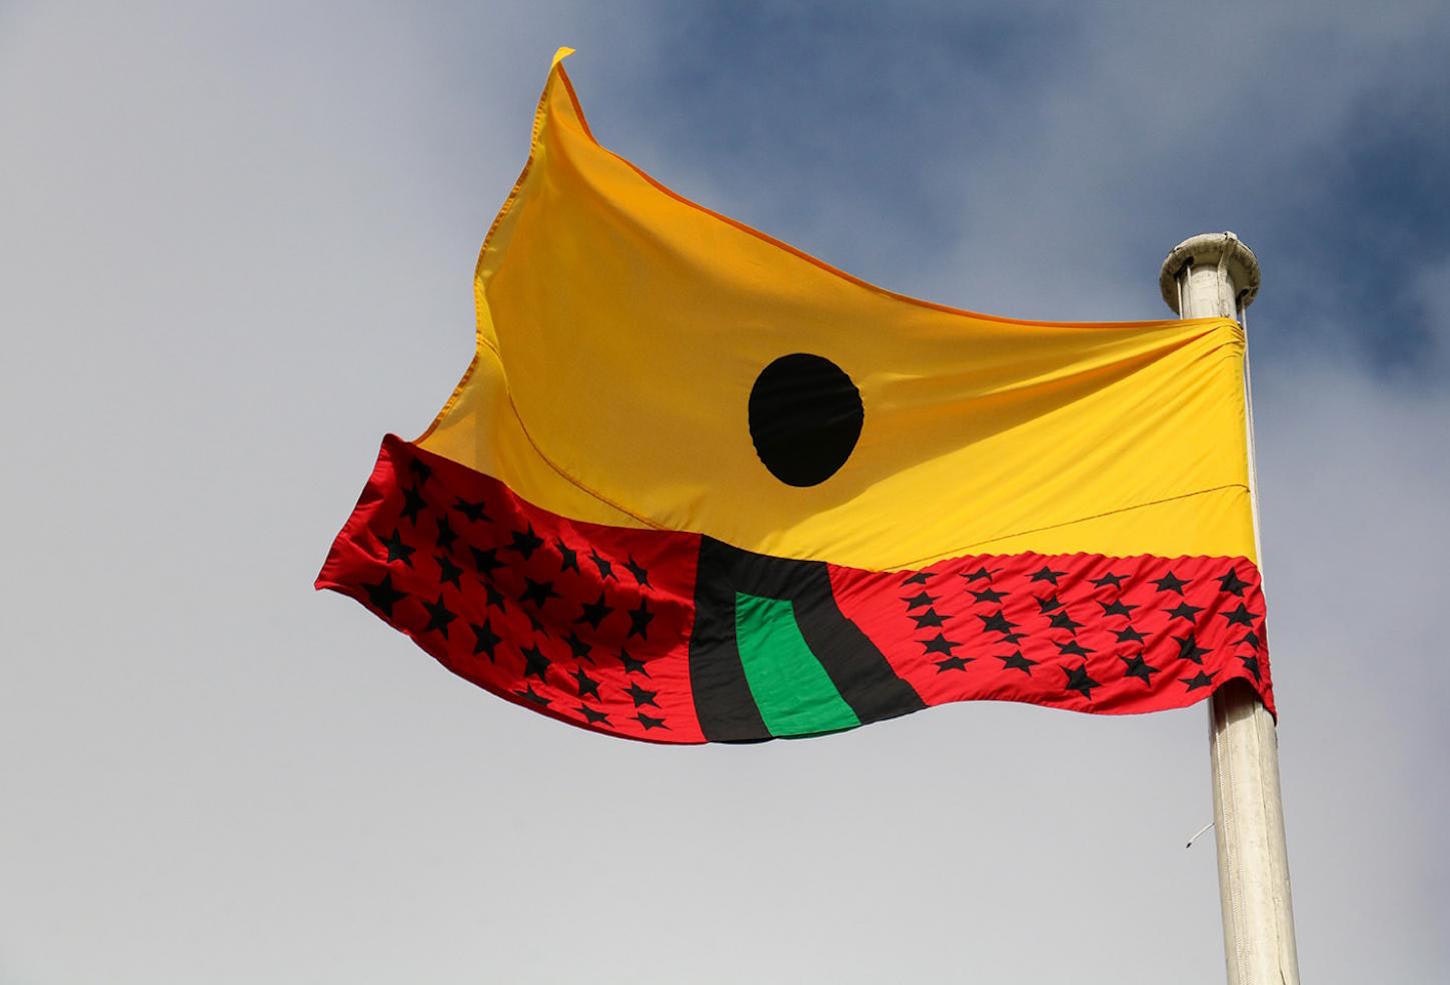 Artist Larry Achiampong's PAN AFRICAN FLAG FOR THE RELIC TRAVELLERS’ ALLIANCE on a flagpole, a red, green, yellow, and black appliqued flag that highlights African diasporic identity